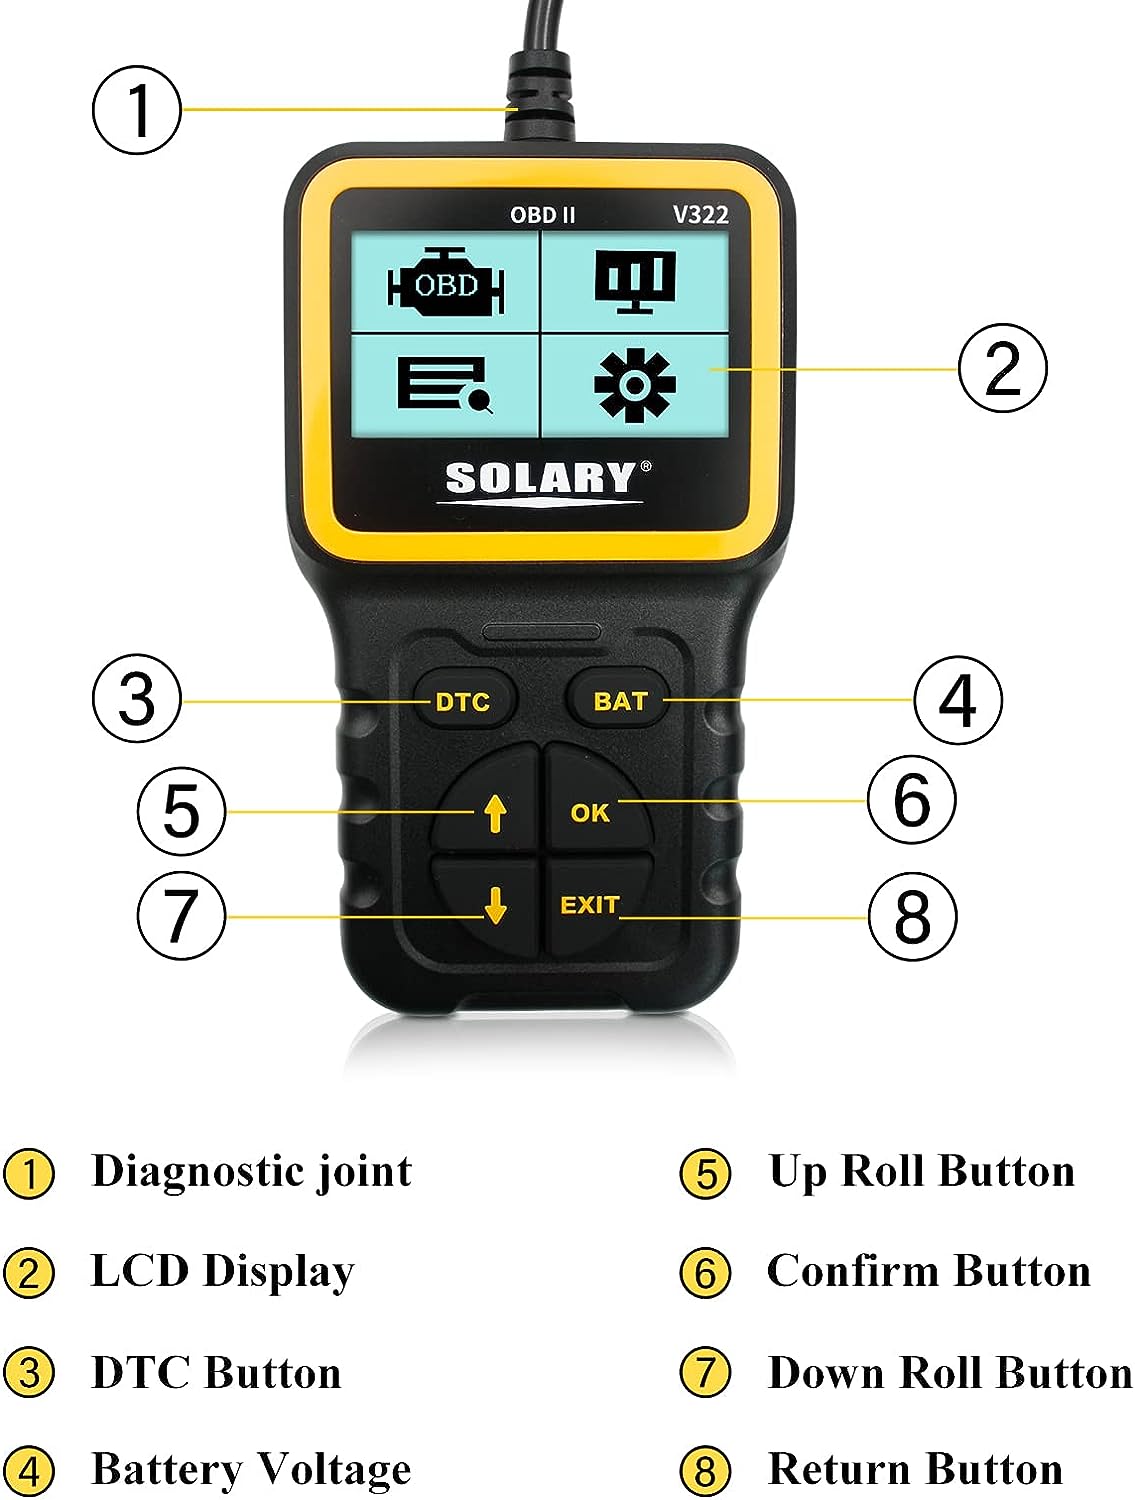 PRO Factory Automotive Scan Tools Vehicle Code Reader Machine OBD